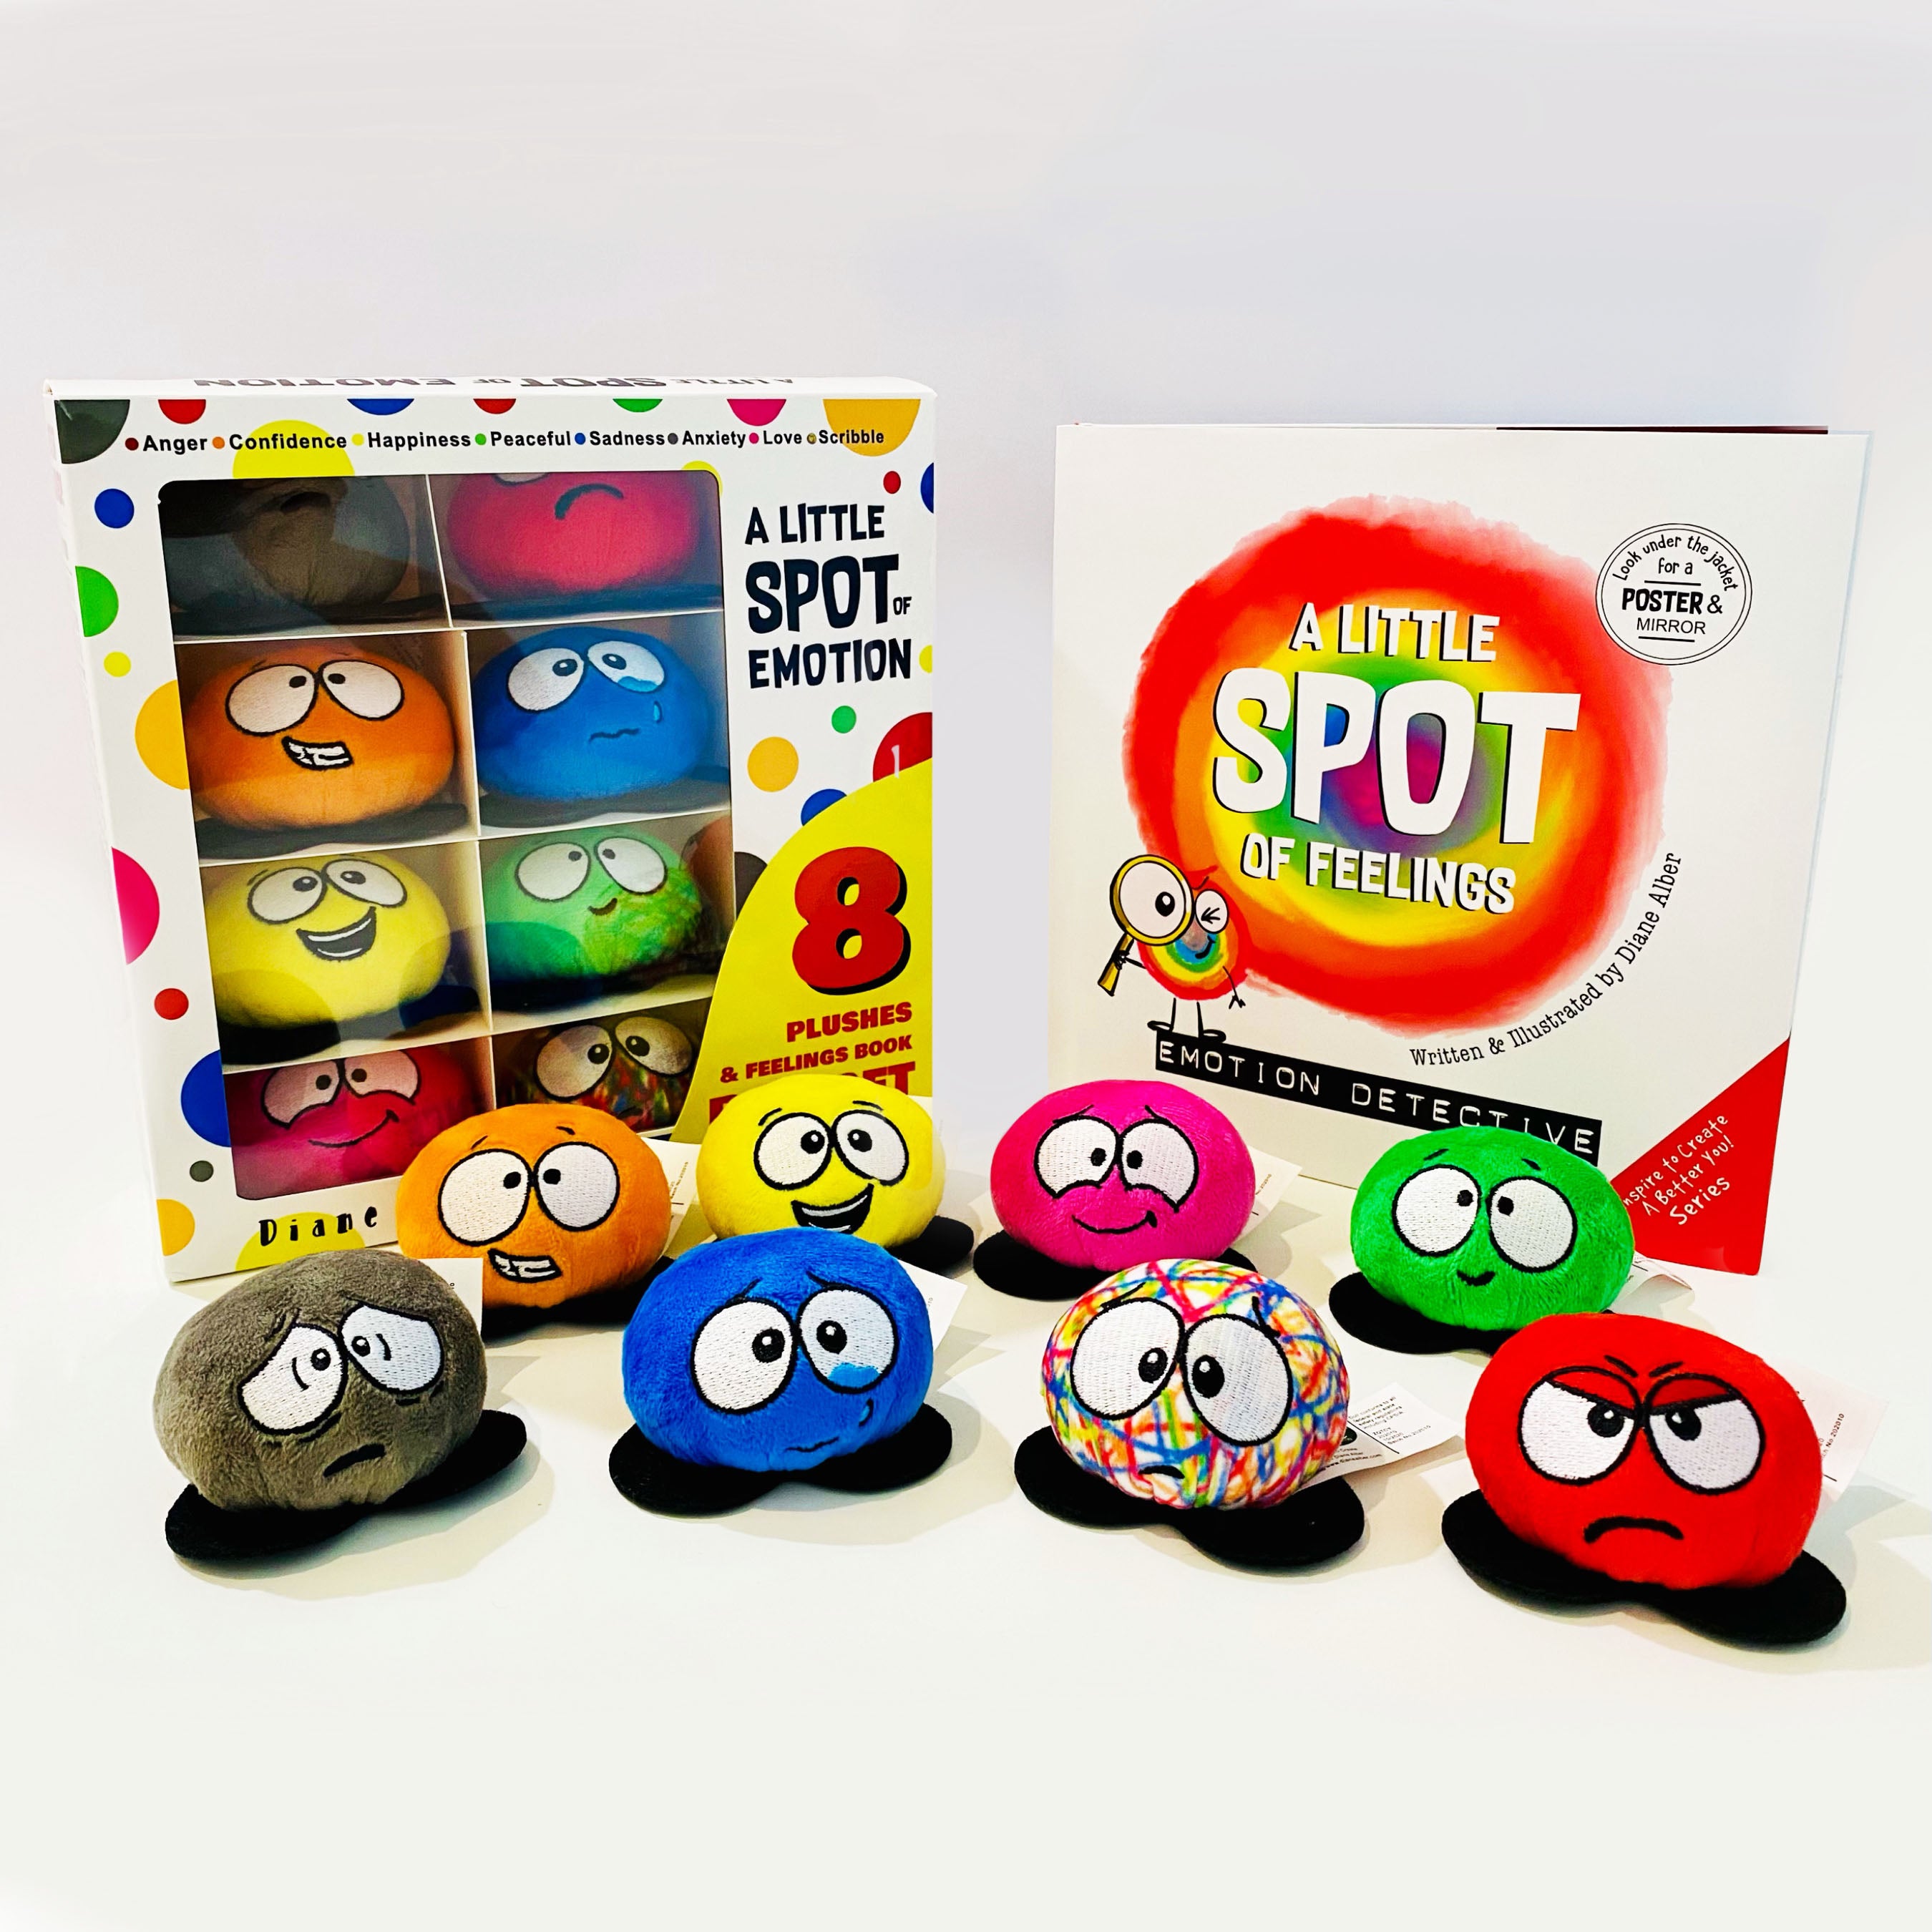 8-mini-emotion-plush-toys-with-a-little-spot-of-feelings-hardcover-book